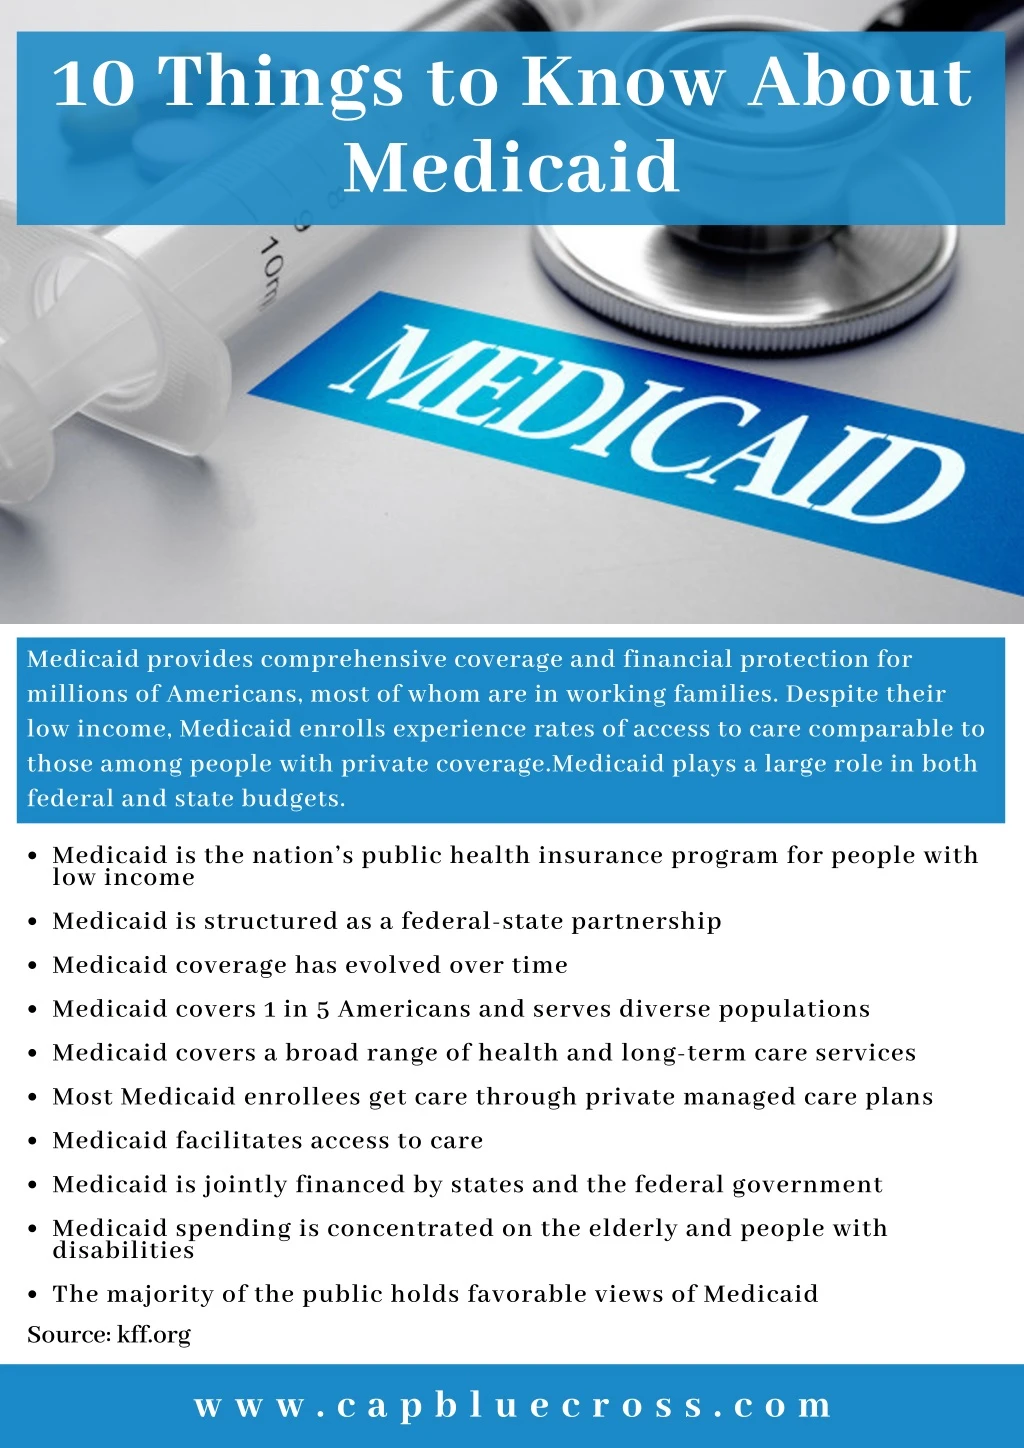 10 things to know about medicaid